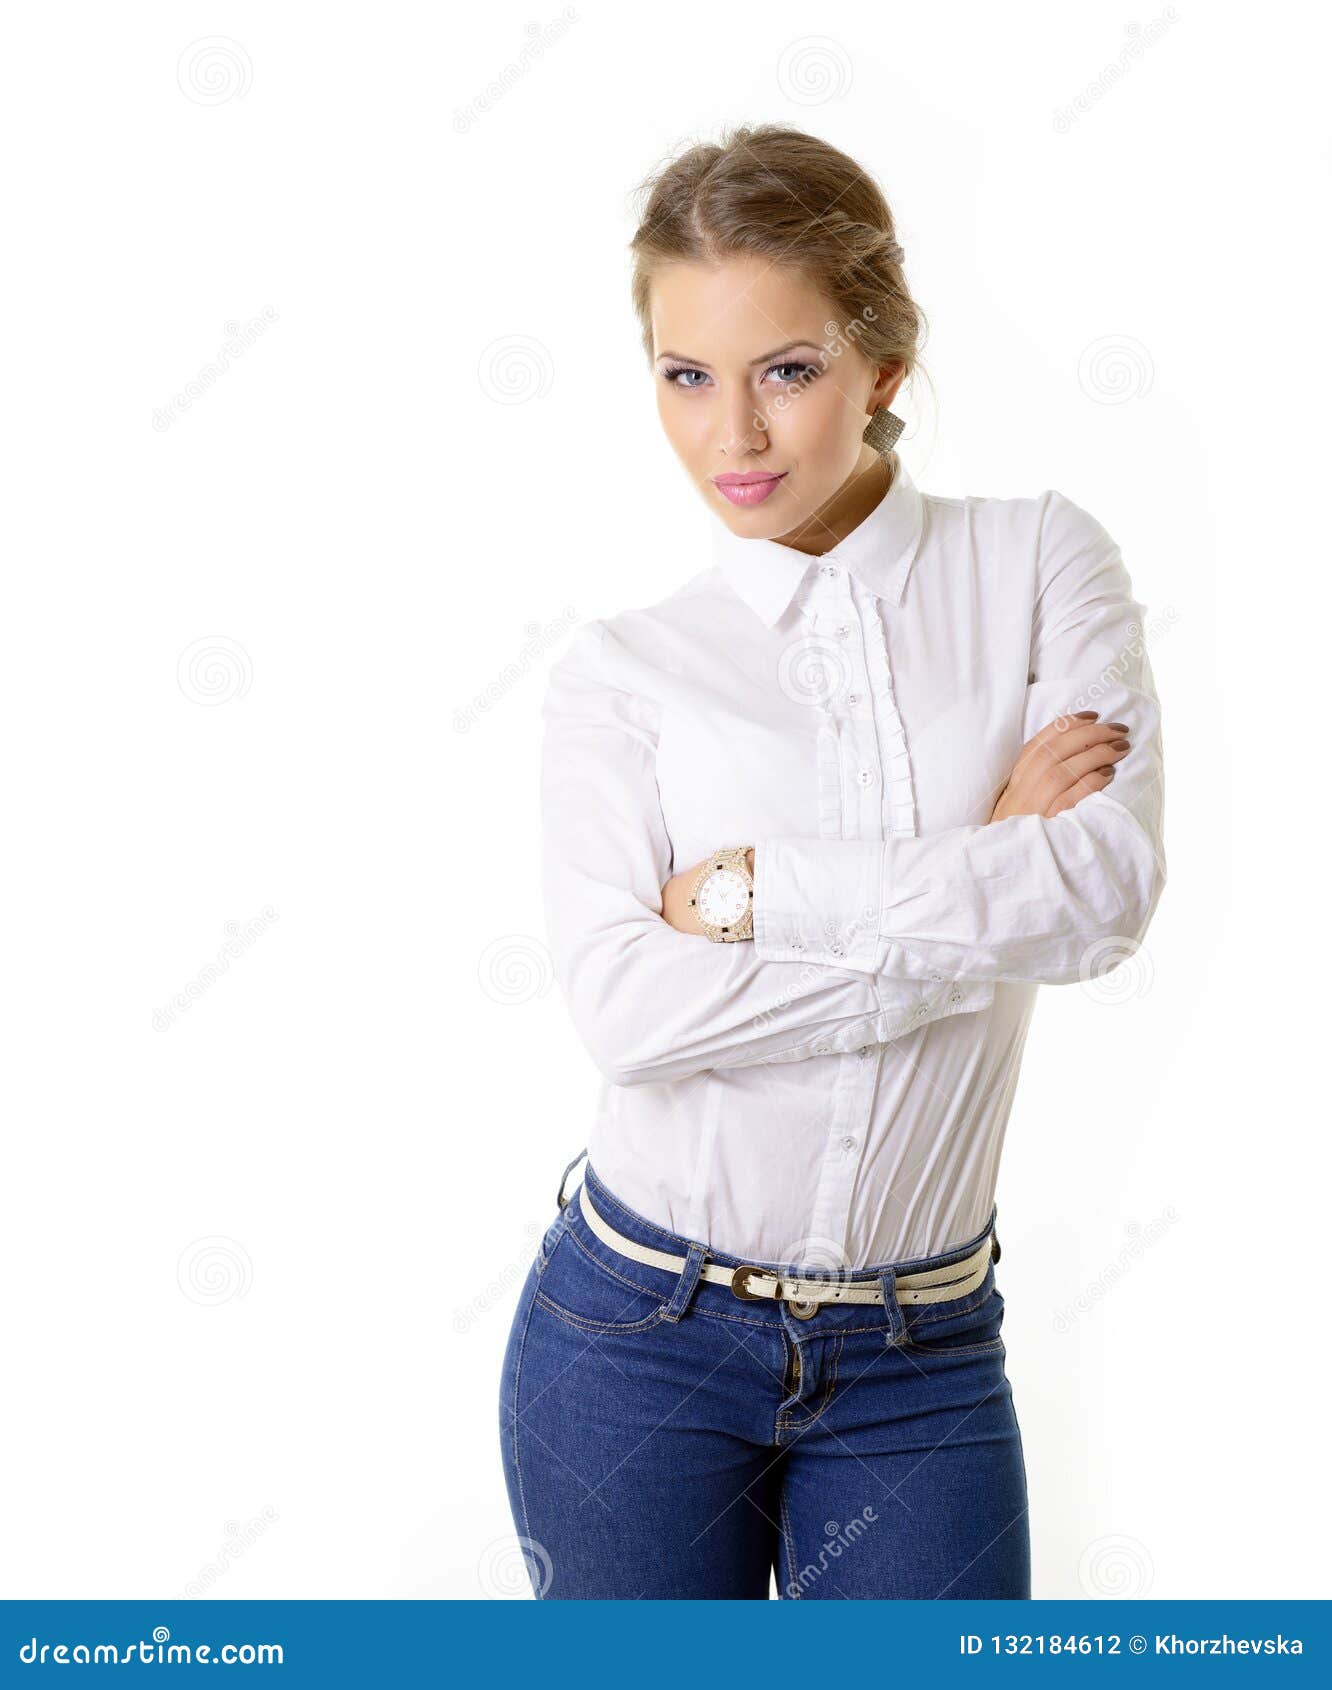 Attrctive Fashion Girl In Blue Jeans And White Shirt With Beautiful Makeup Stock Photo Image Of Girl Eyes